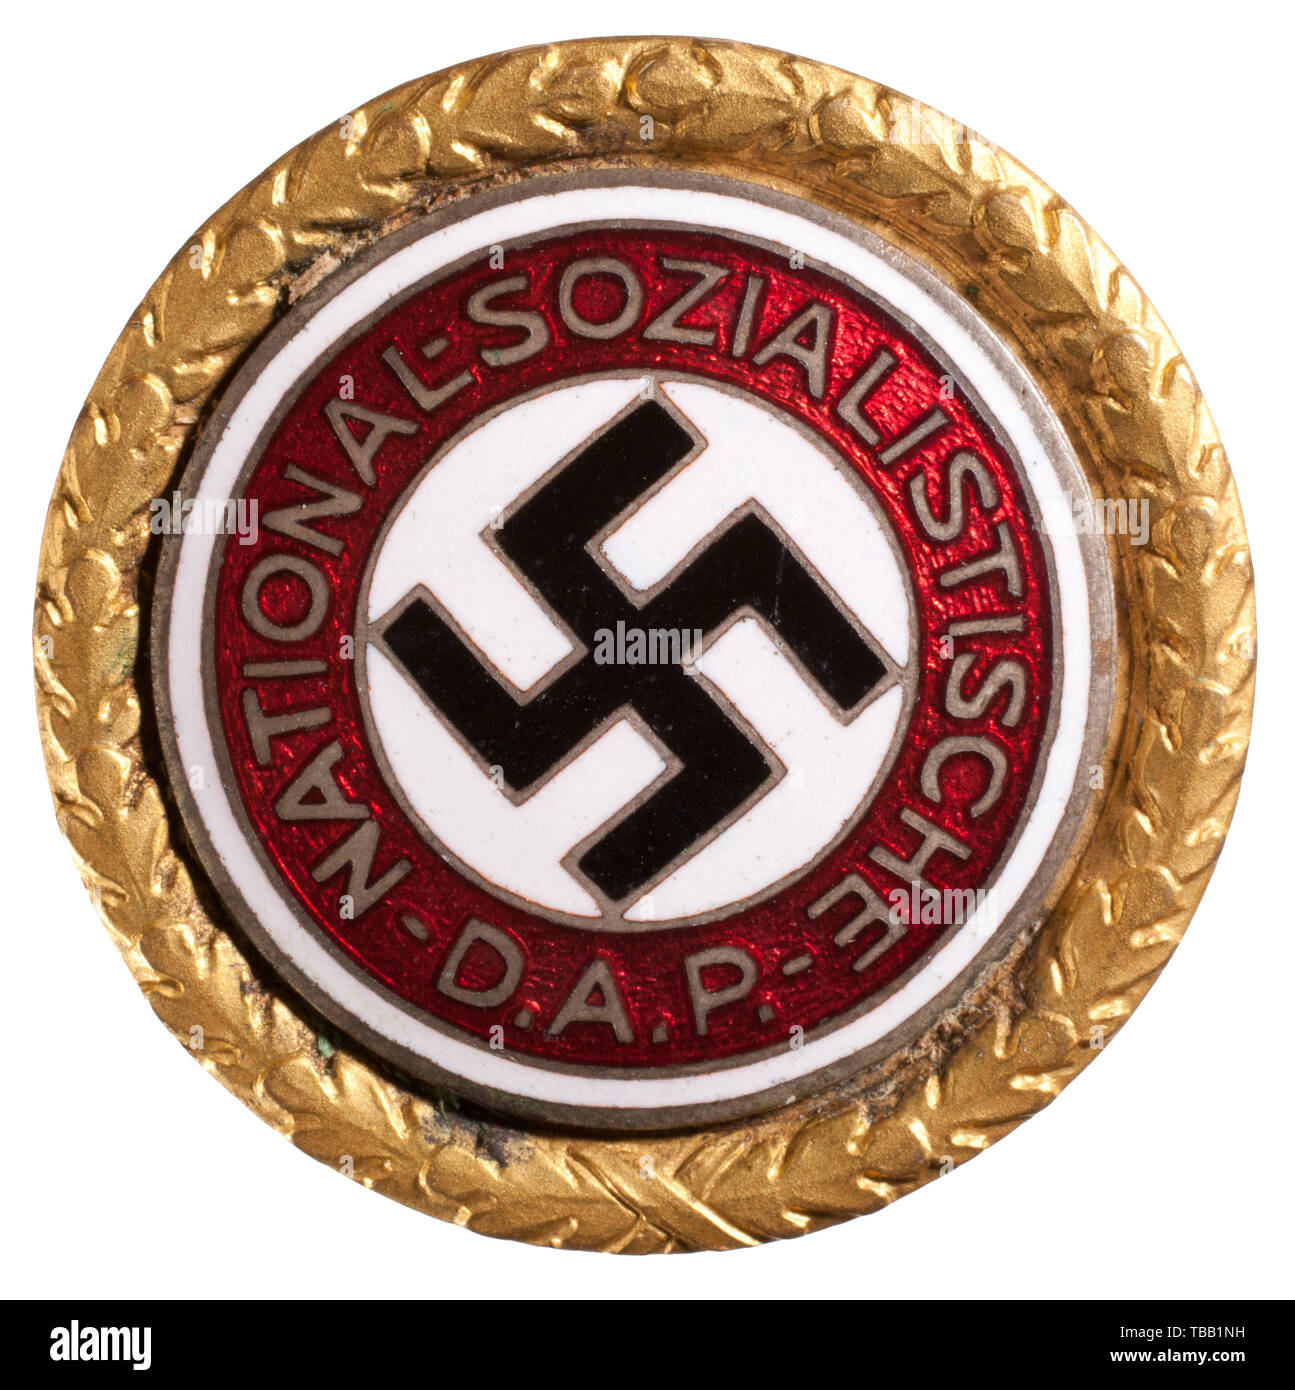 THE JOHN PEPERA COLLECTION, A Golden Party Badge of the NSDAP in 30 mm, Deschler produced gilt Tombak with inset silver-plated, enamelled party badge. Party member number "94711" on reverse with stamped "GES. GESCH." above decorated buttonhole tab., Editorial-Use-Only Stock Photo